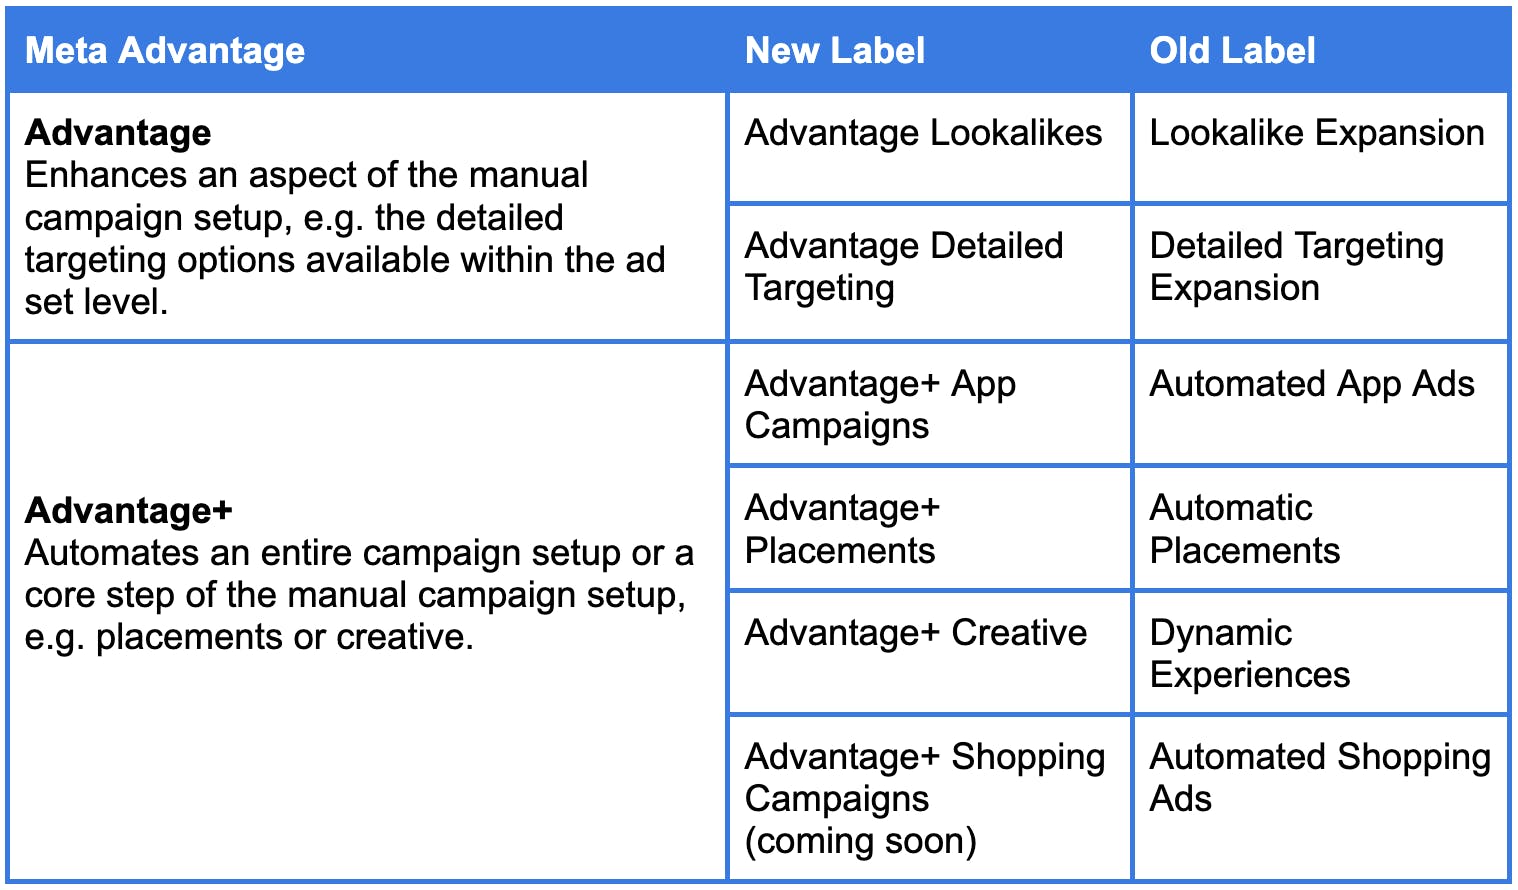 Meta Advantage, enhances an aspect of the manual campaign setup, e.g. the detailed targeting option available within the ad set level, for example 'Advantage Lookalikes'/'Advantage Detailed Targeting'. Meta Advantage+, automates an entire campaign setup or a core step of the manual campaign setup, e.g. placements or creative, for example 'Advantage+ App Campaigns'/'Advantage+ Placements'.